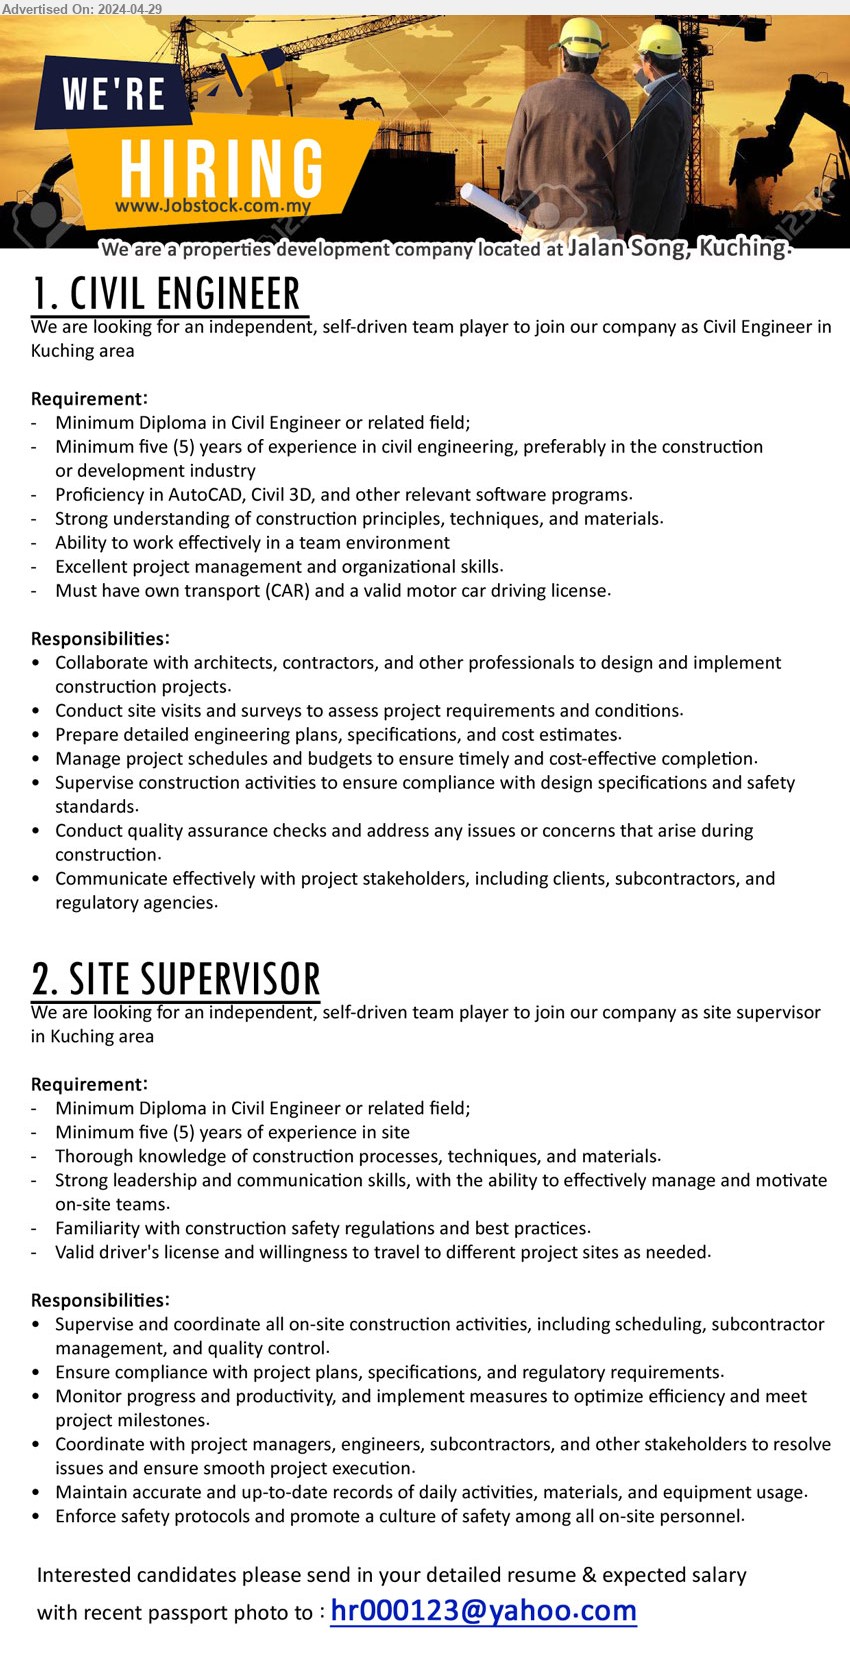 ADVERTISER (Property Development Company) - 1. CIVIL ENGINEER  (Kuching), Diploma in Civil Engineer, Proficiency in AutoCAD, Civil 3D, and other relevant software programs,...
2. SITE SUPERVISOR (Kuching), Diploma in Civil Engineer, 5 yrs. exp.,...
Email resume to ...